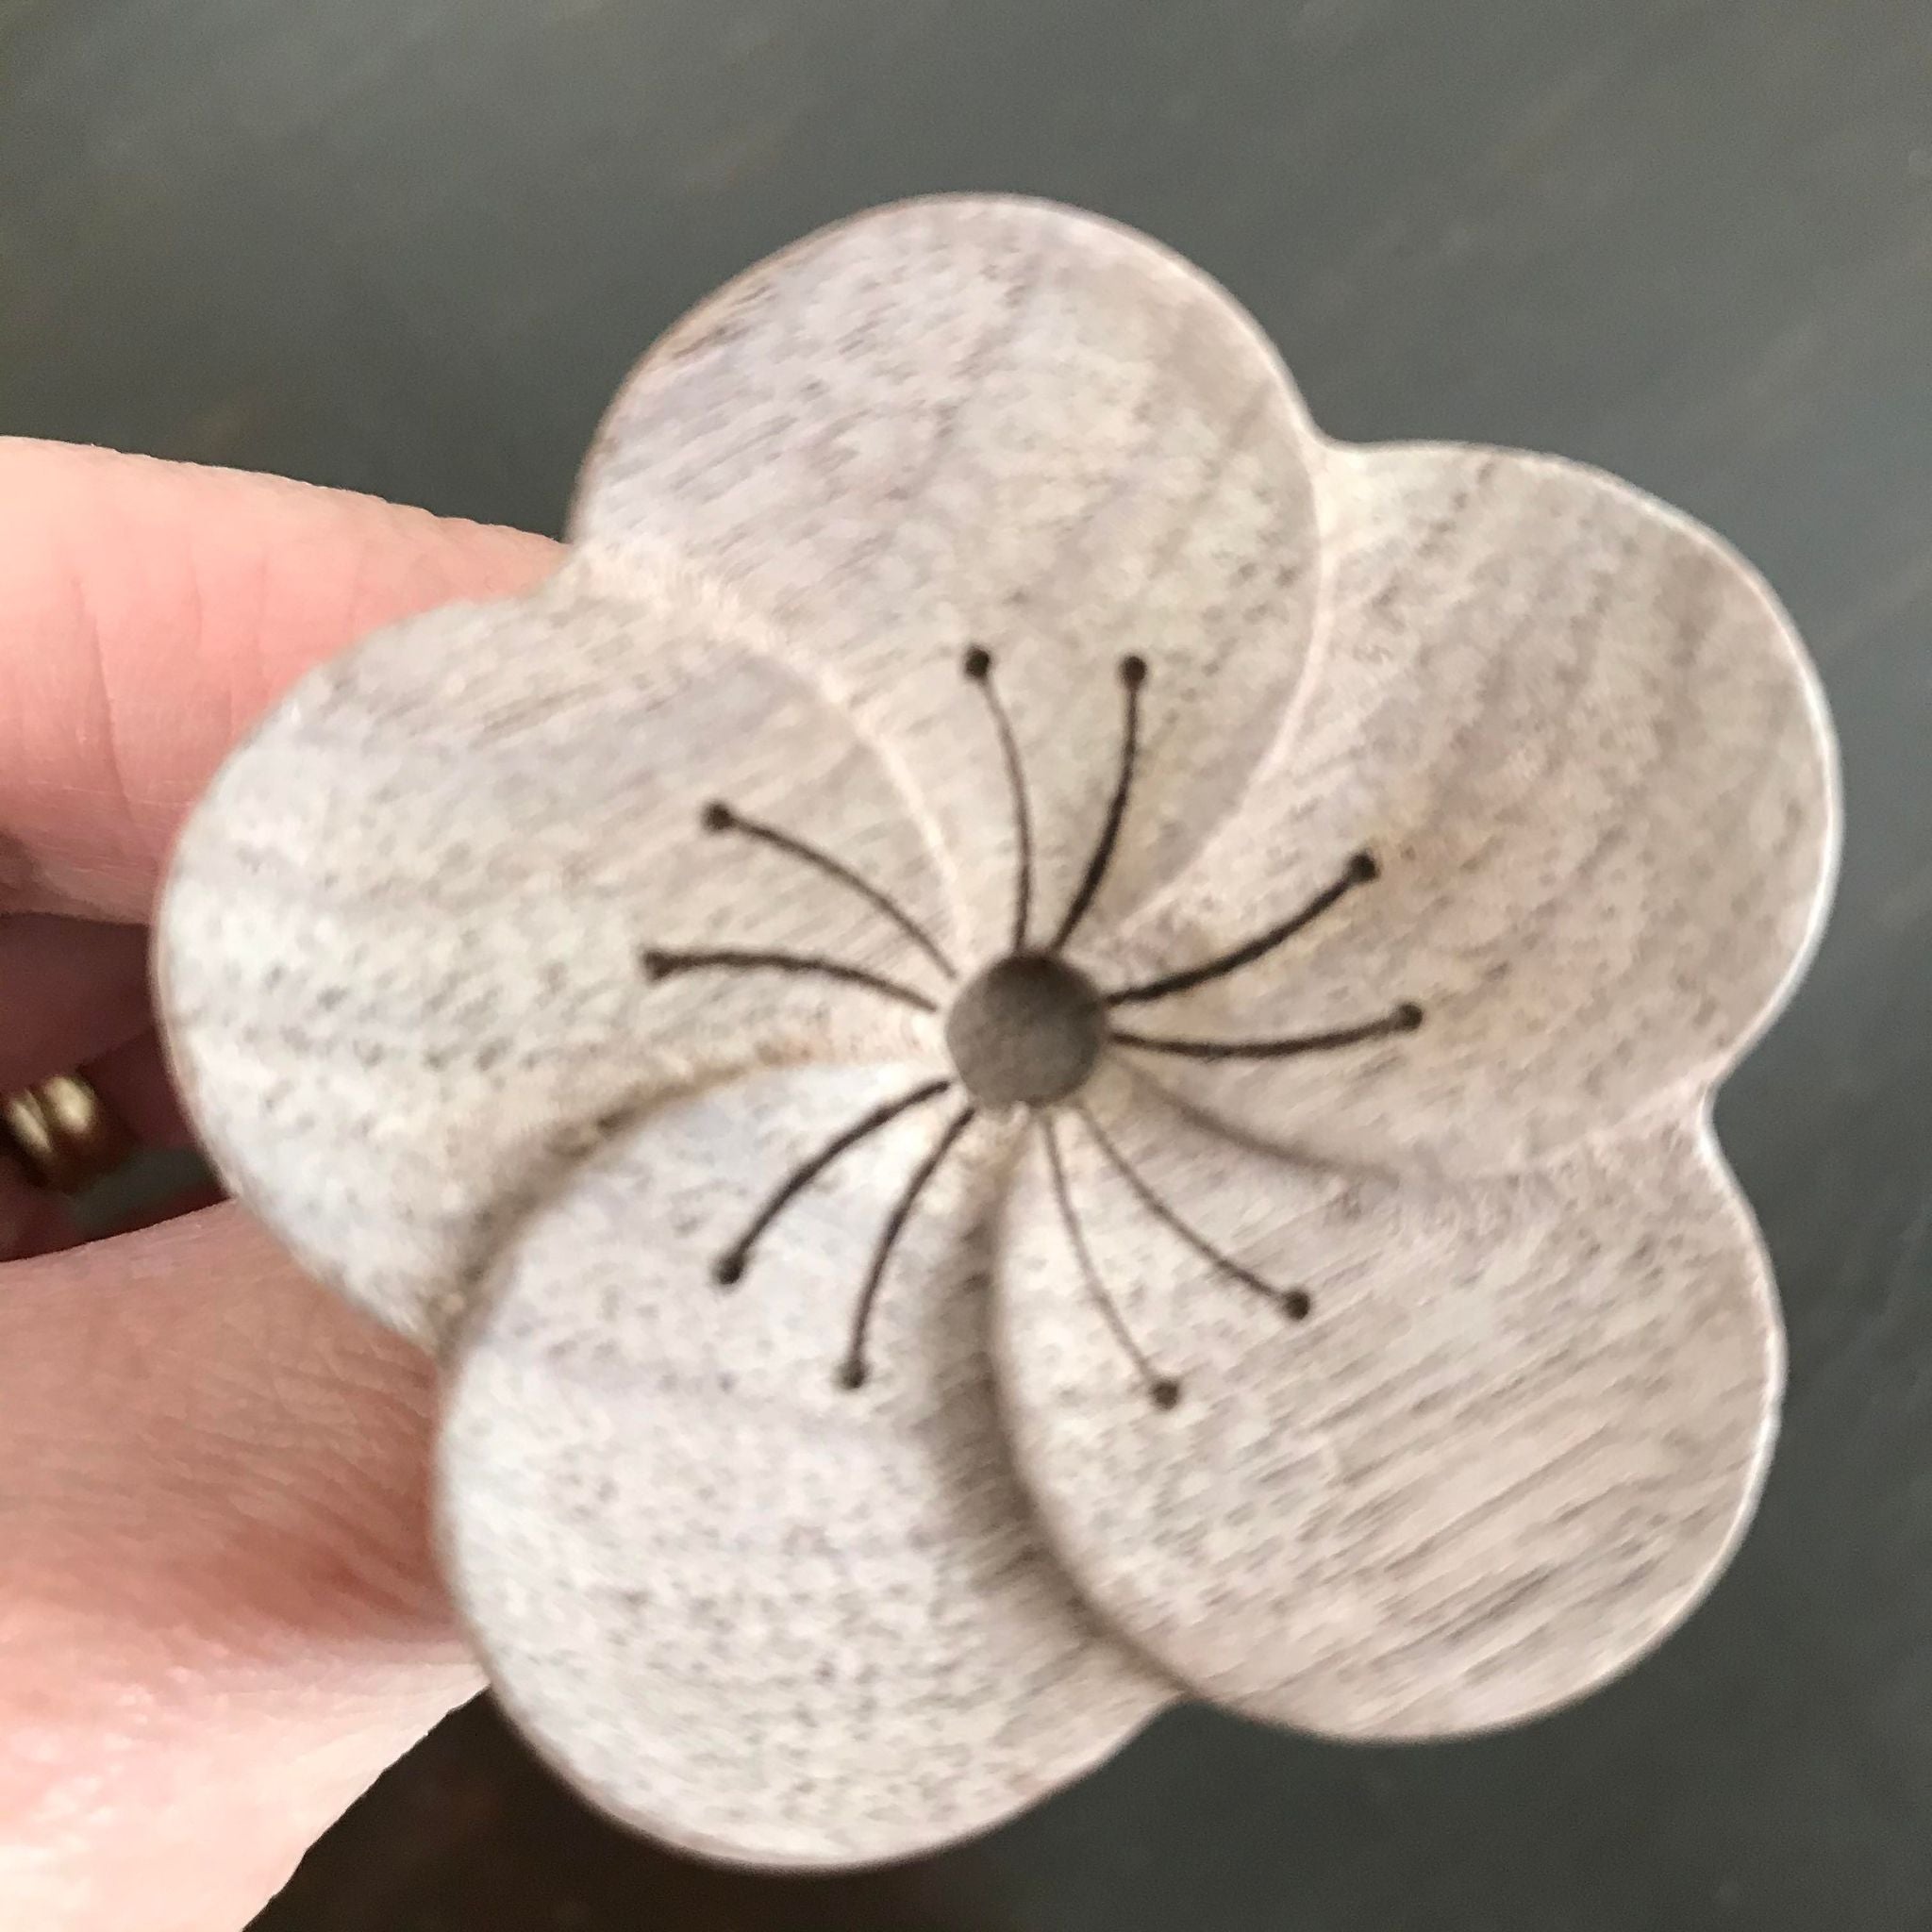 pocket sized wooden essential oil diffuser in a flower shape is travel friendly